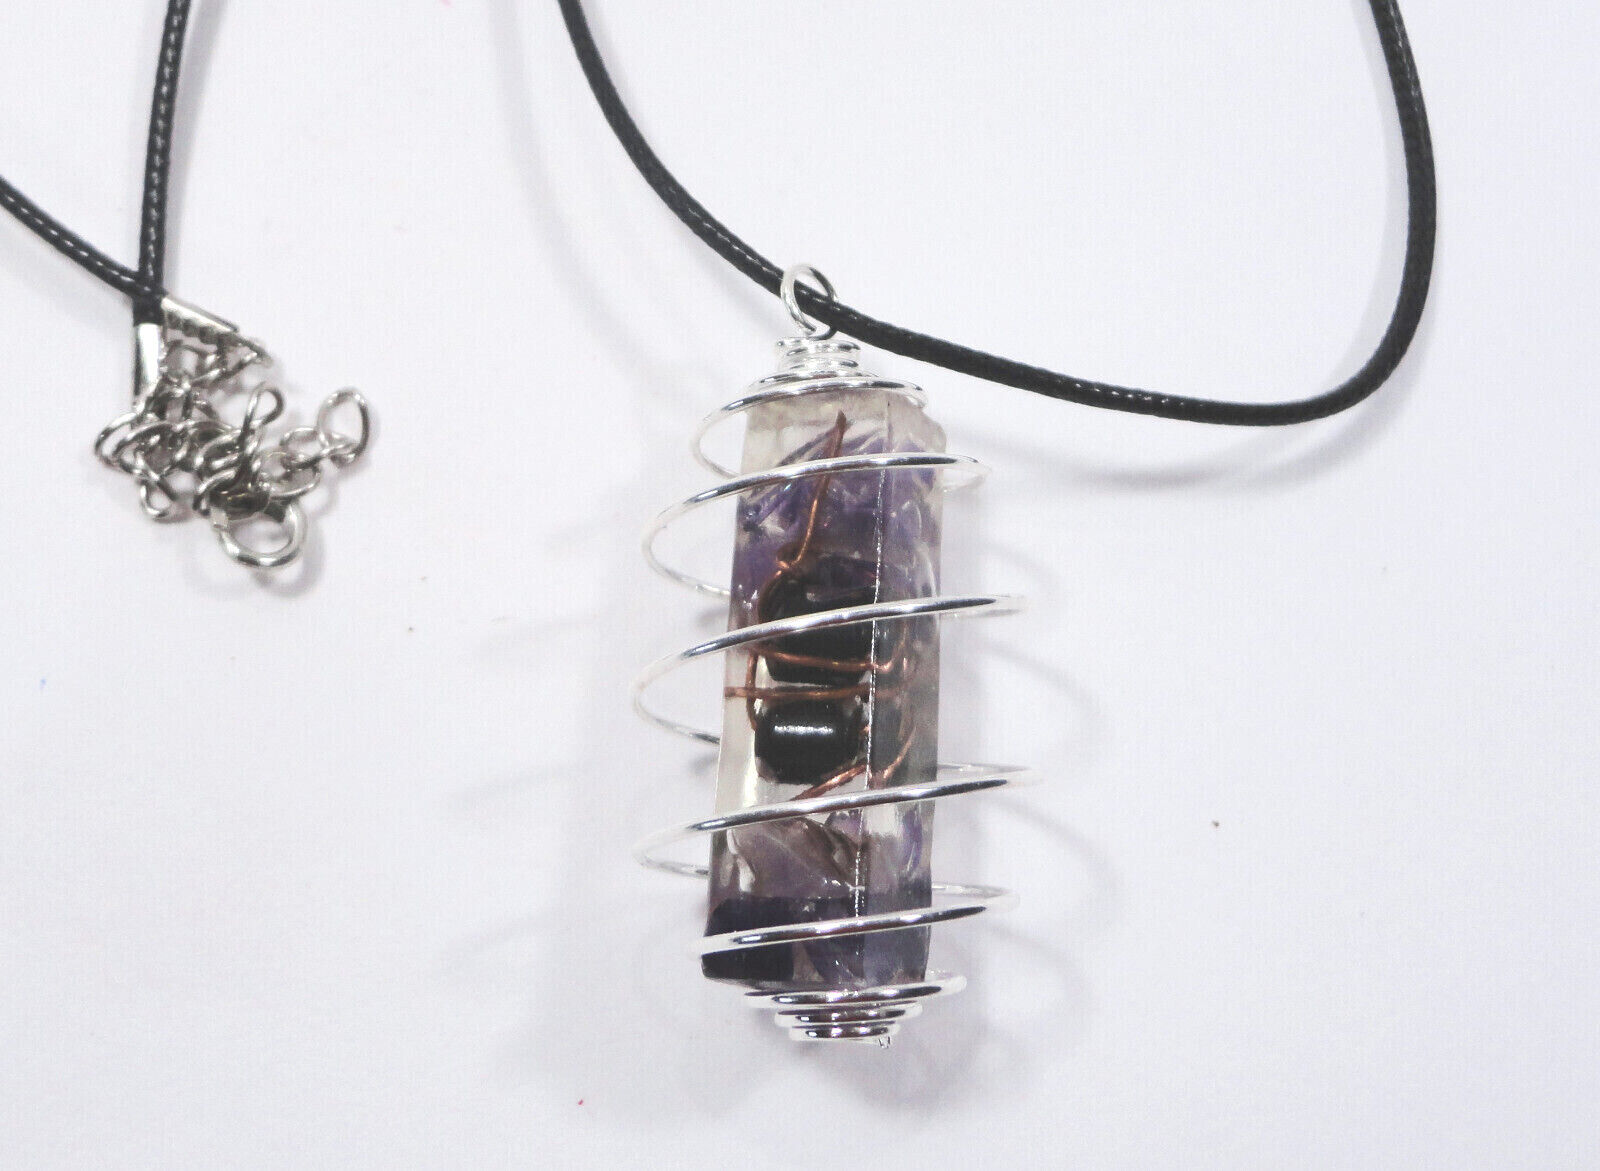 AMETHYST COPPER ORGANITE IN SPIRAL CAGE NECKLACE POSITIVE ORGONE ENERGY AUS MADE